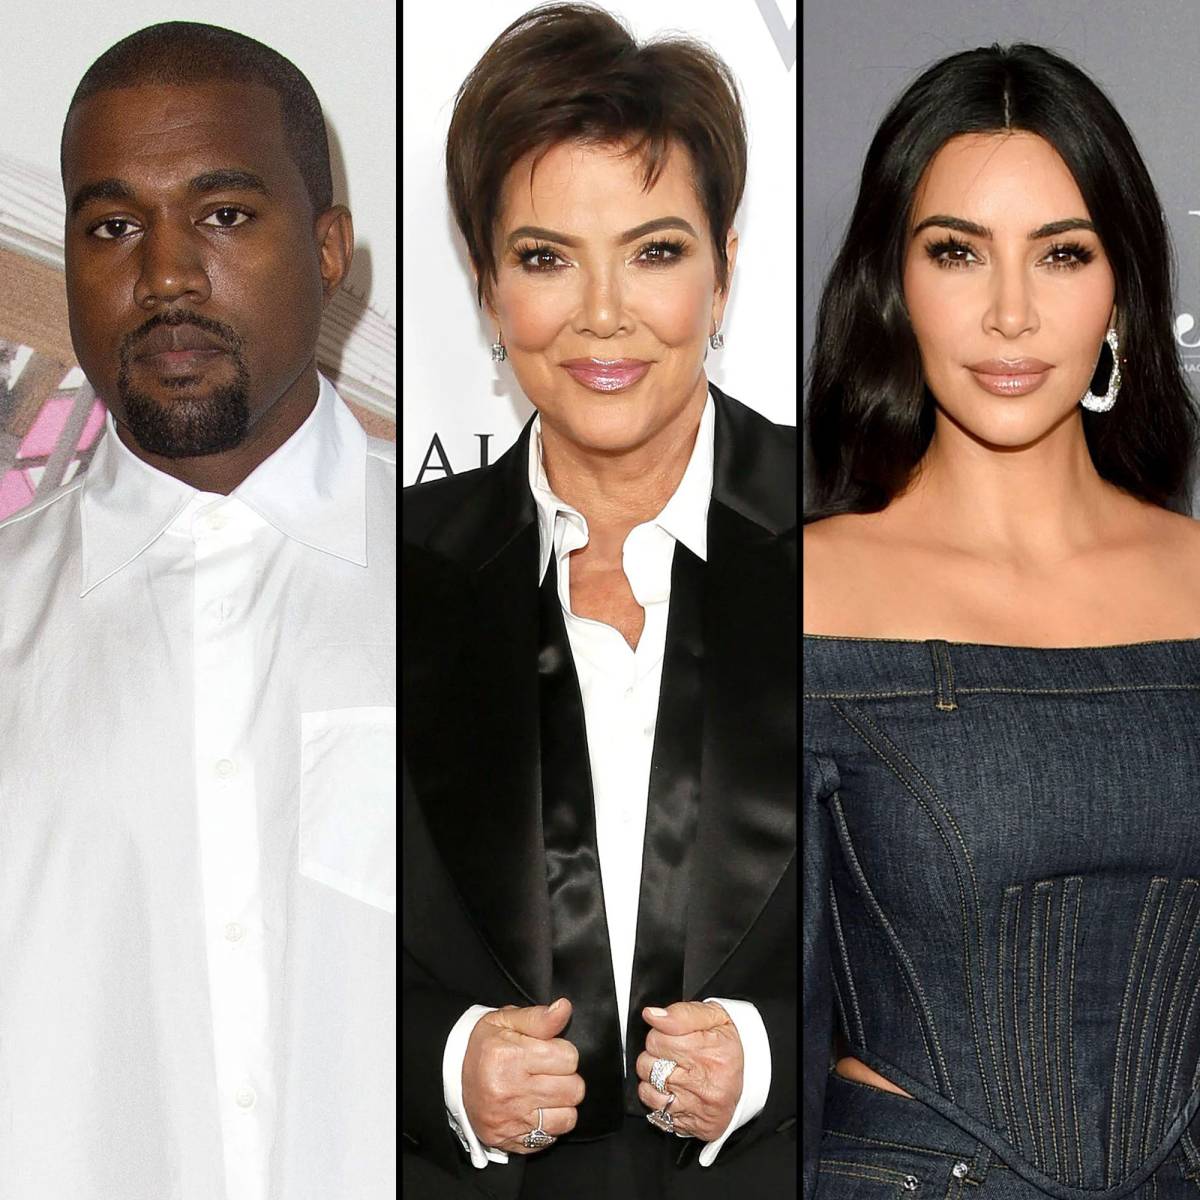 Priyamani Sexvideo - Kanye West Calls Out Kris Jenner, Claims Porn 'Destroyed' Family